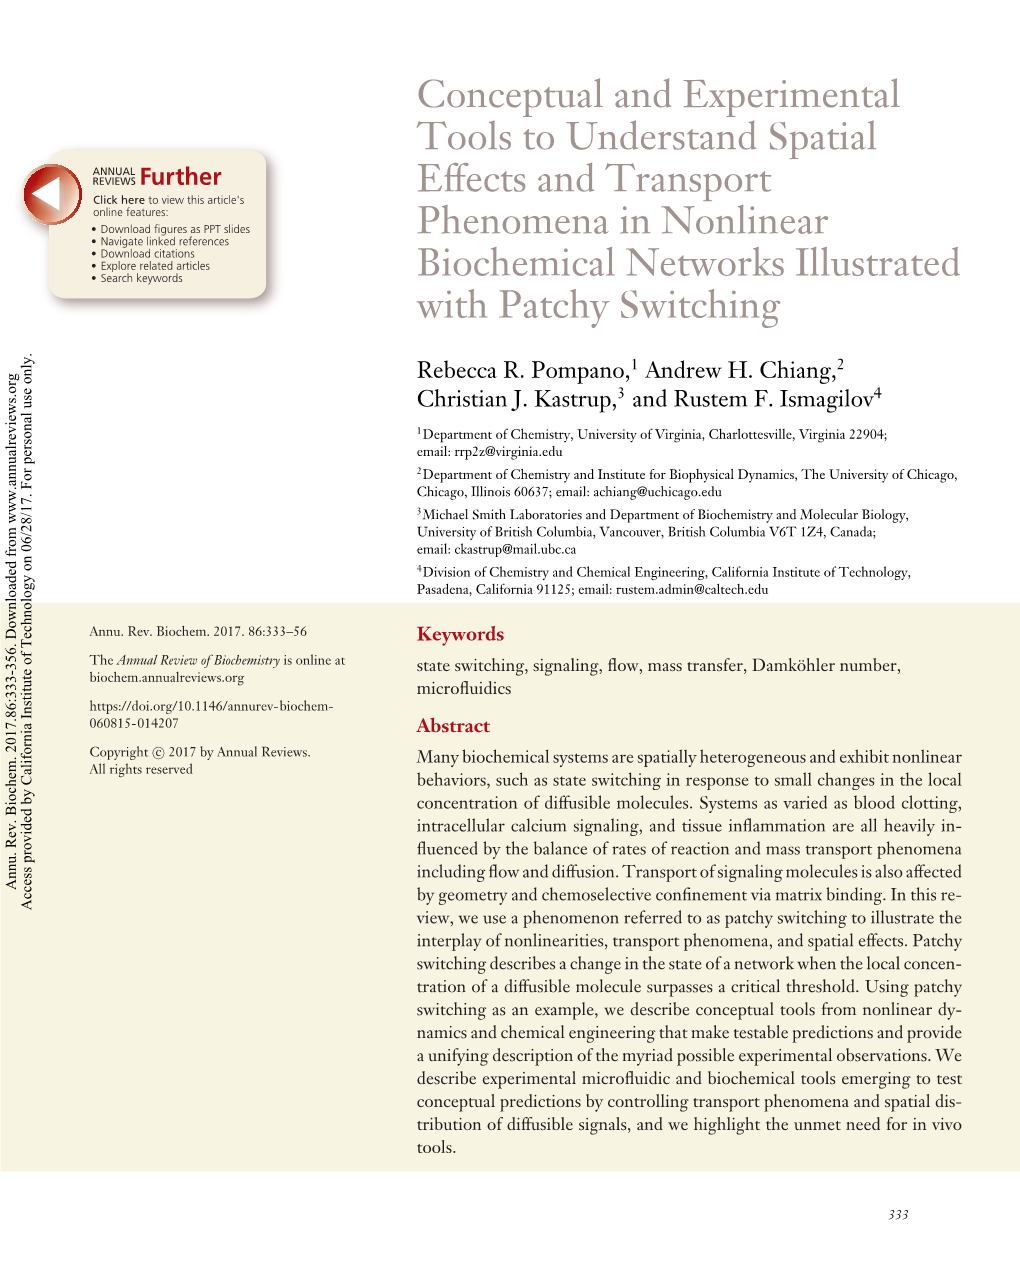 Conceptual and Experimental Tools to Understand Spatial Effects and Transport Phenomena in Nonlinear Biochemical Networks Illustrated with Patchy Switching Rebecca R